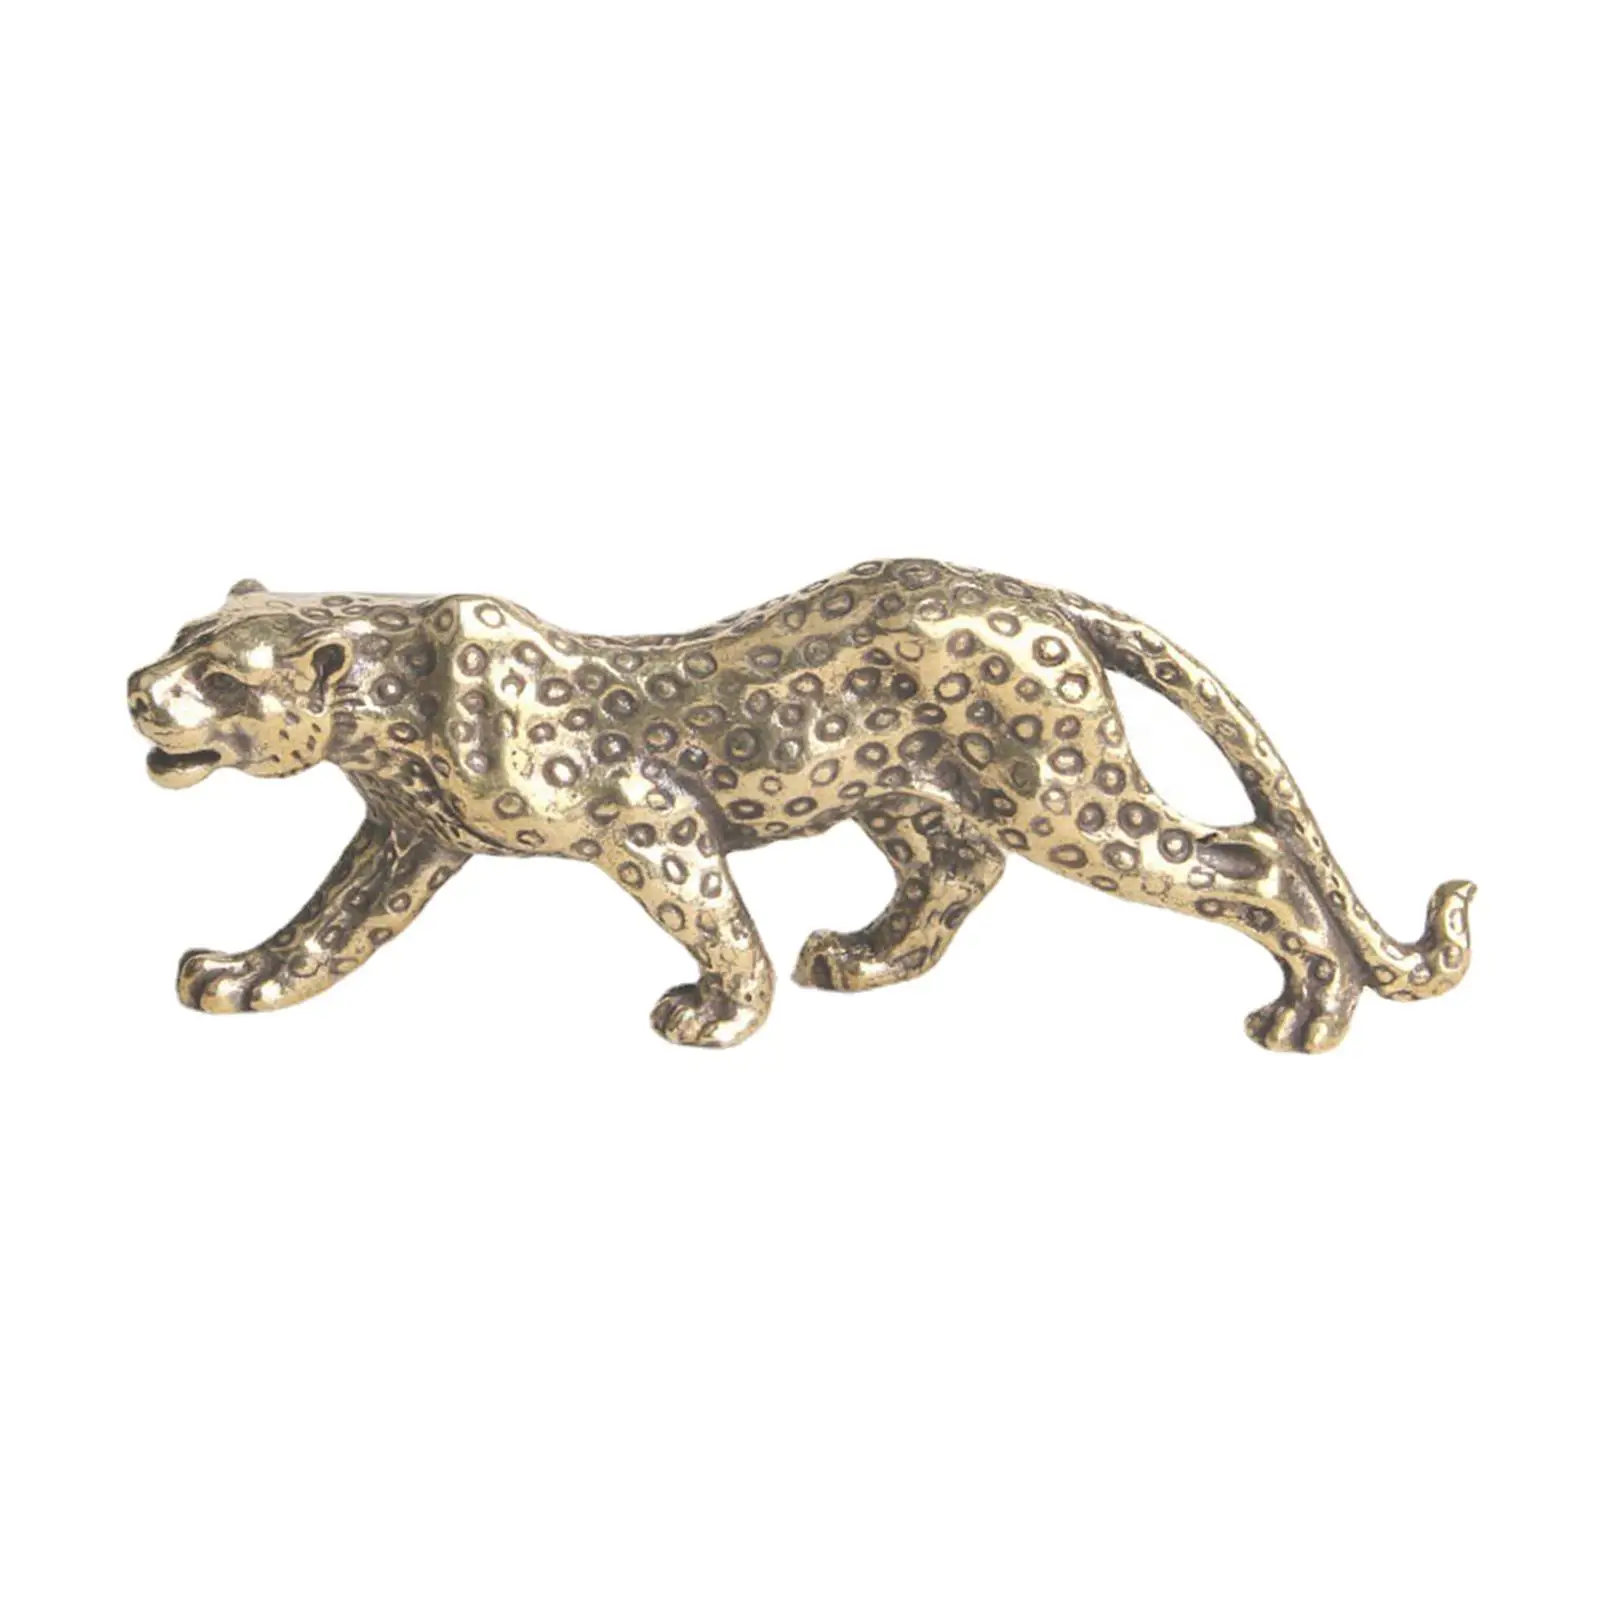 Vintage Leopard Statue Panther Figurine Brass Exquisite Statuette Animal Sculpture for Home Office Outdoor Bookshelf Decoration